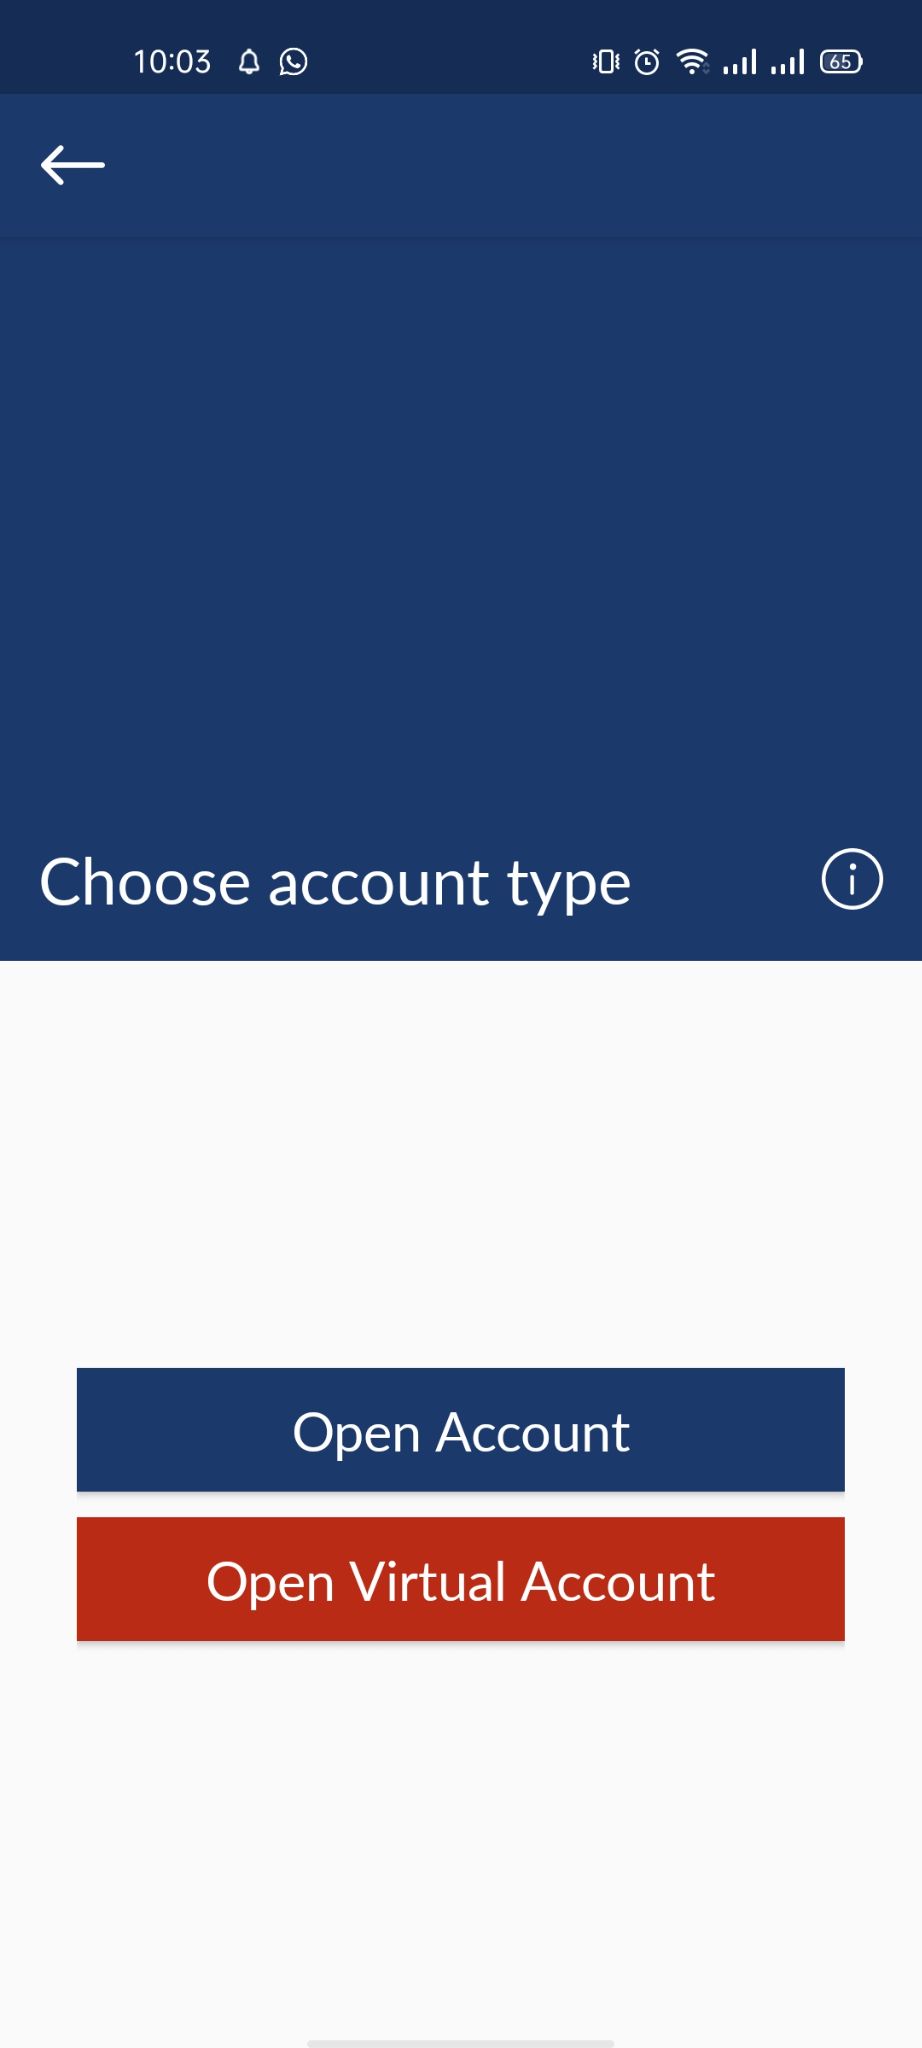 Choice Trade Demo Account | Trade With %0 Risk